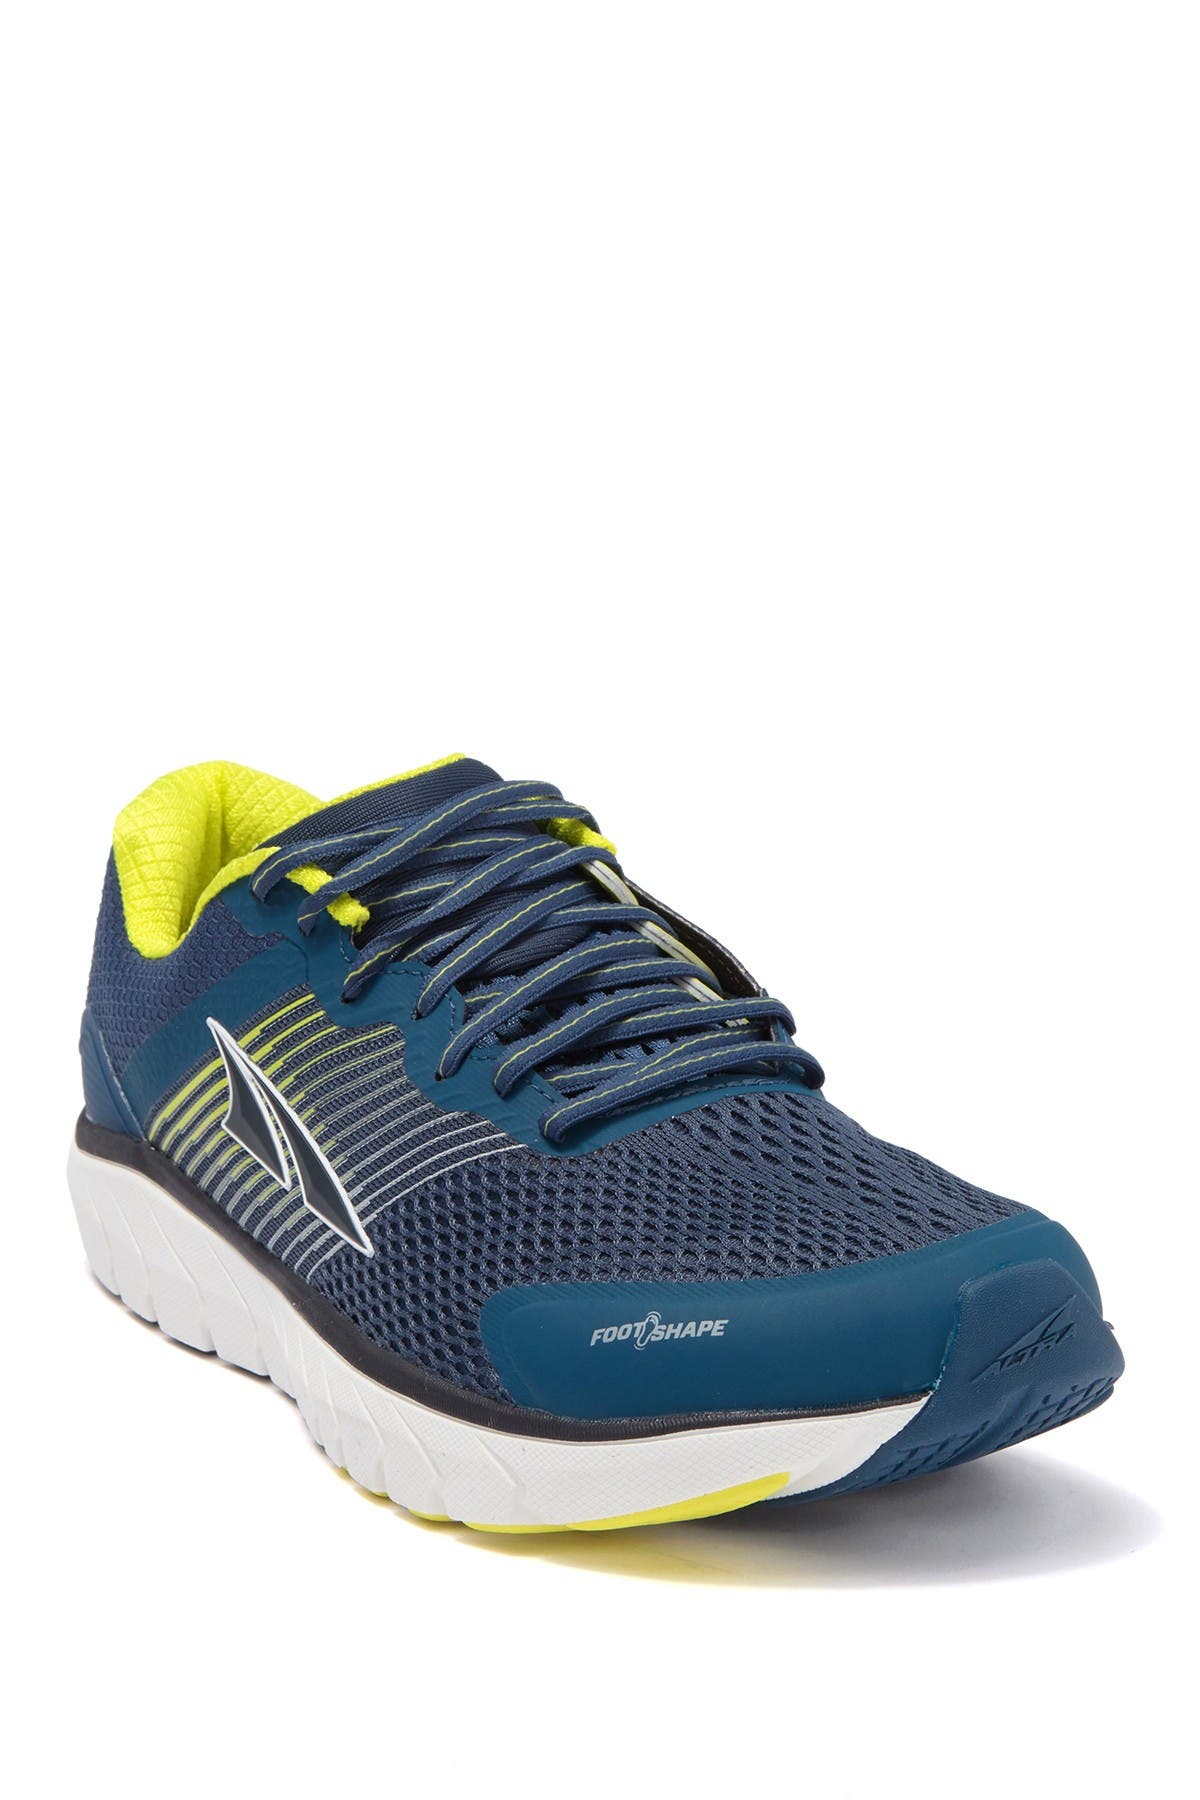 Altra Provision 4 Running Sneaker In Blue/lime